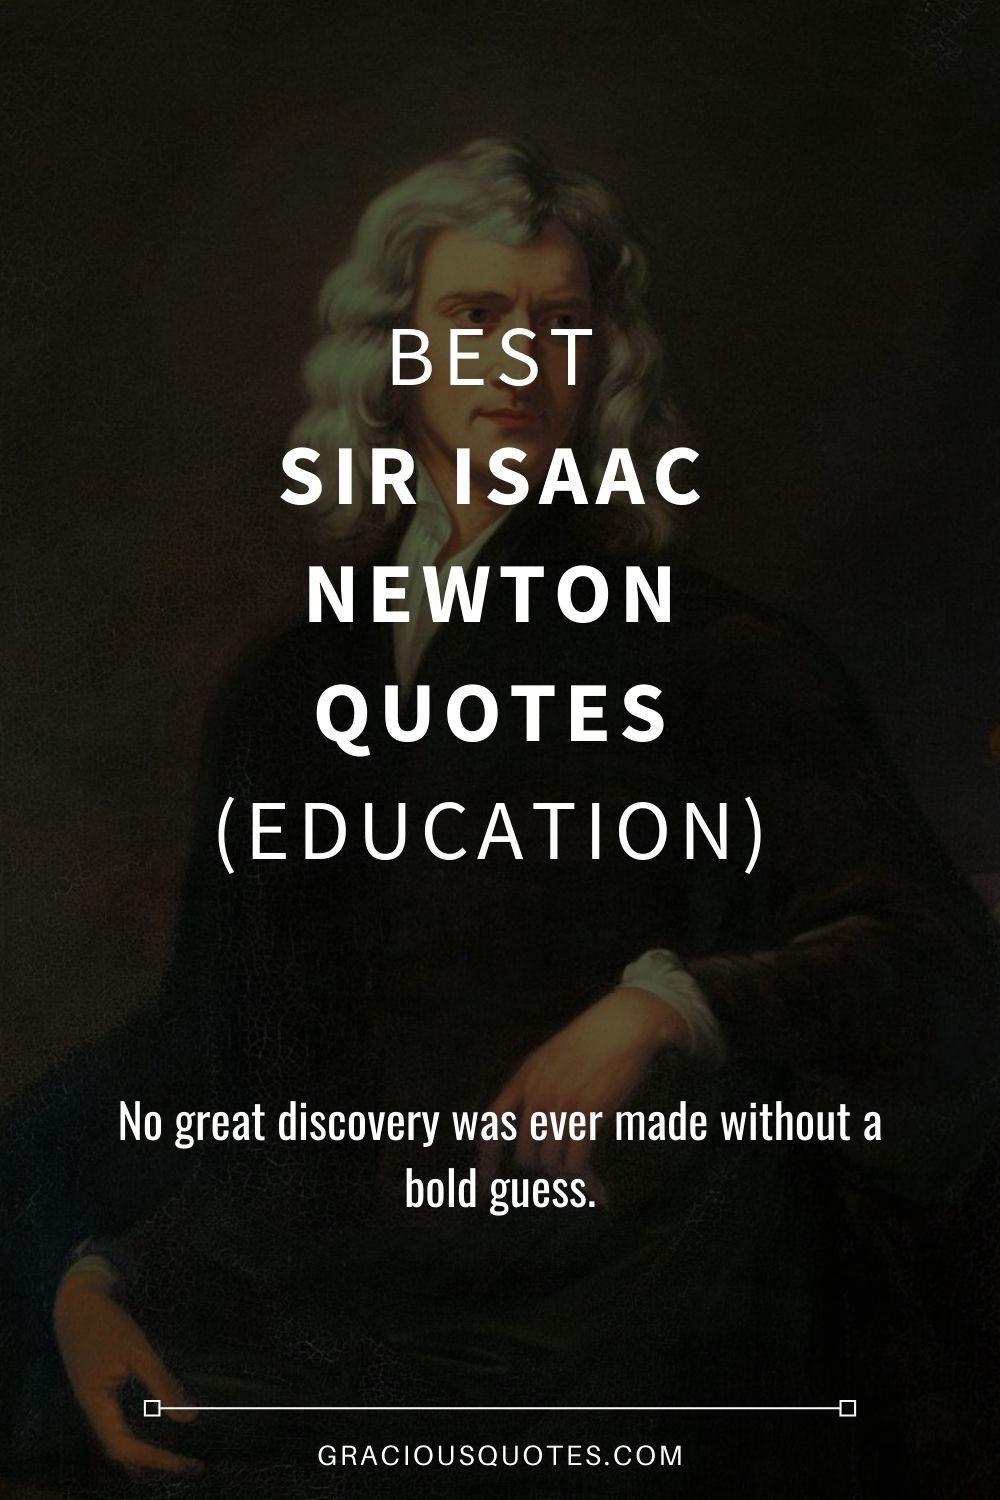 Best Sir Isaac Newton Quotes (EDUCATION) - Gracious Quotes